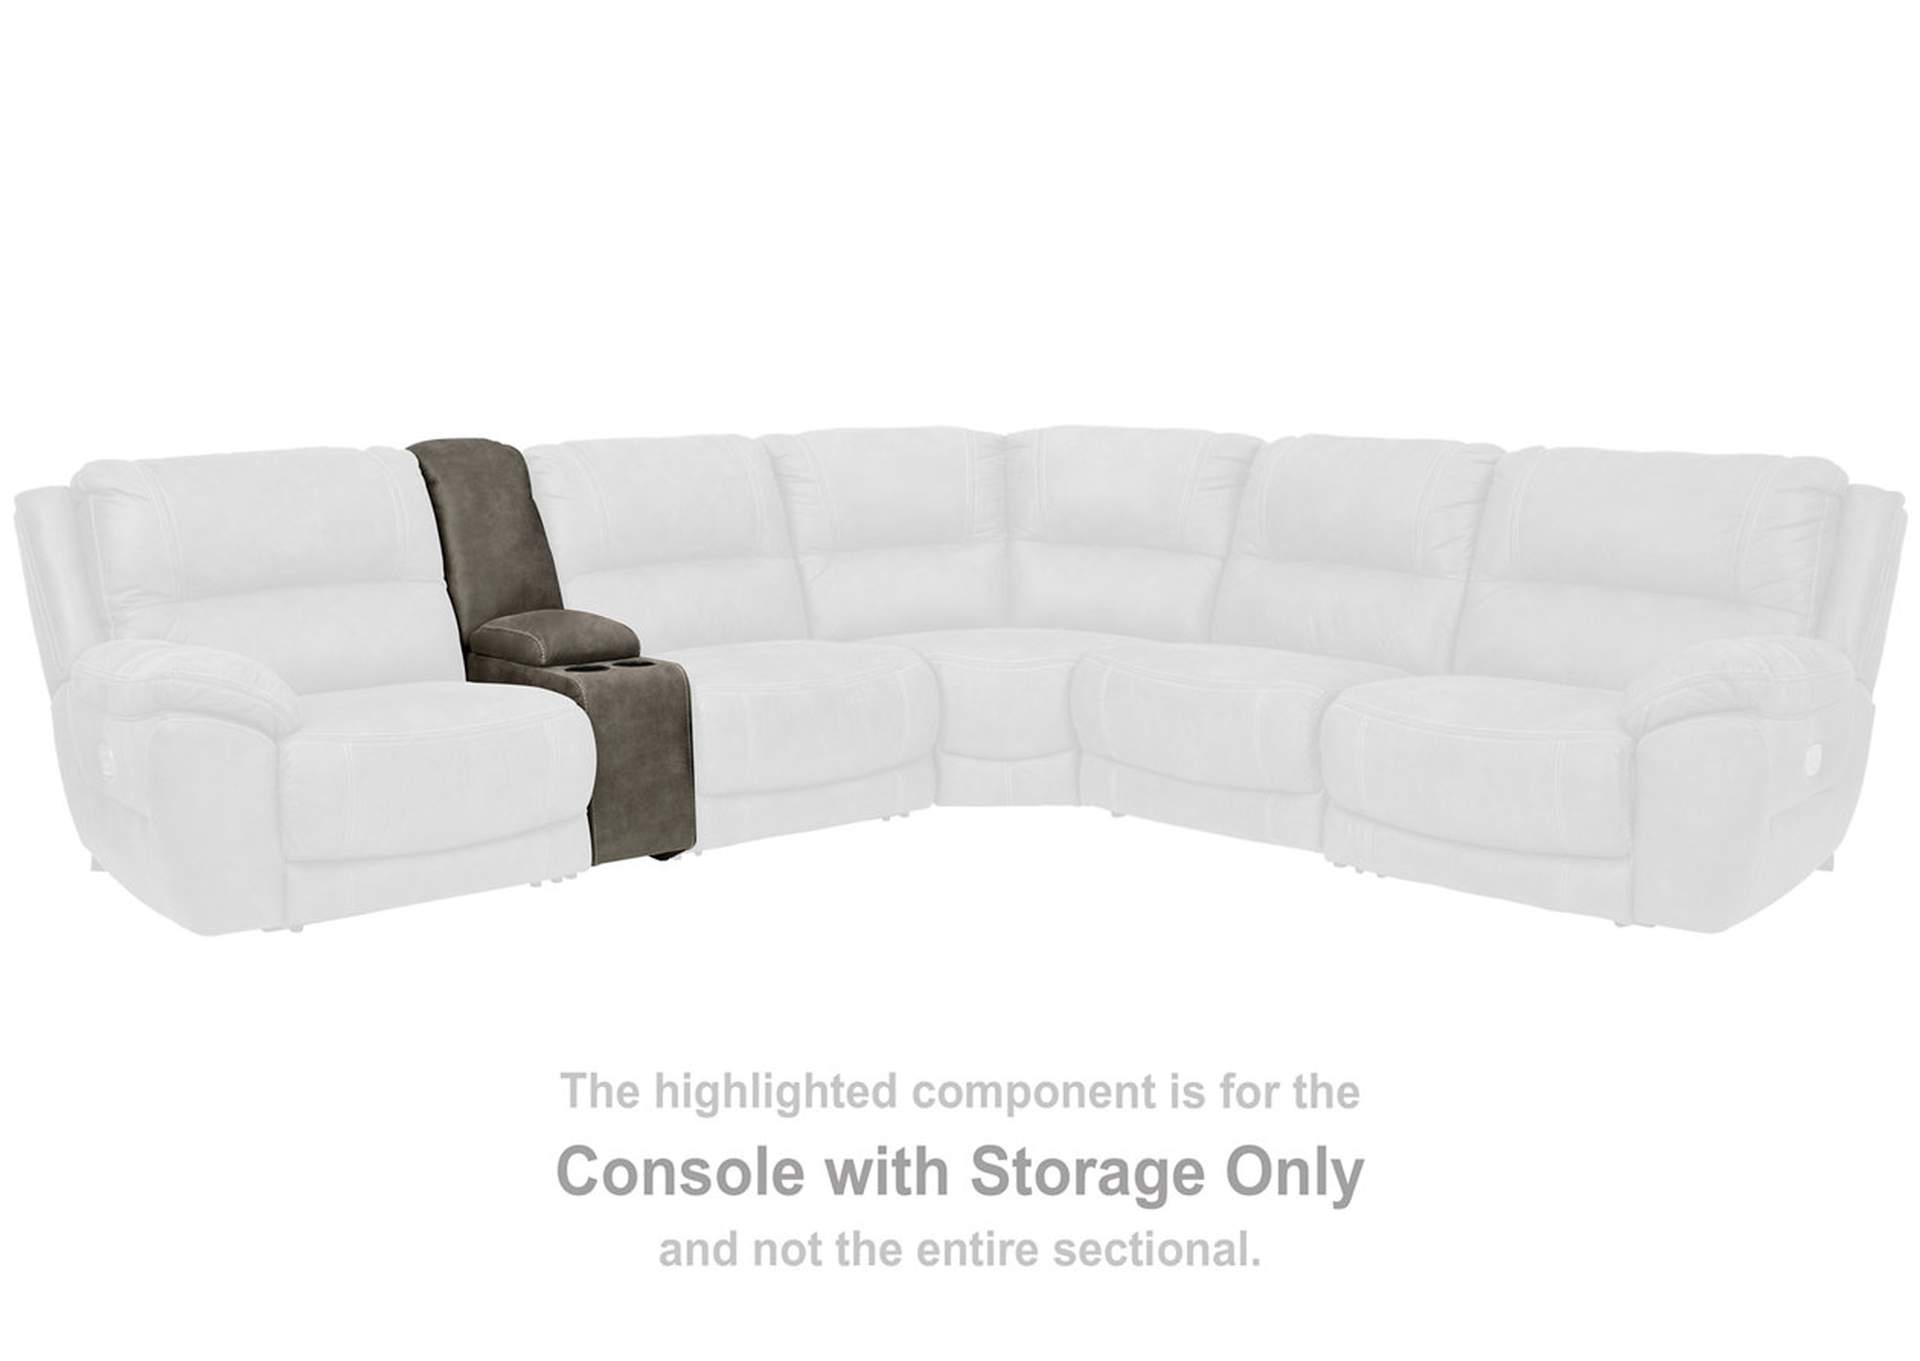 Cranedall 3-Piece Power Reclining Sectional,Signature Design By Ashley